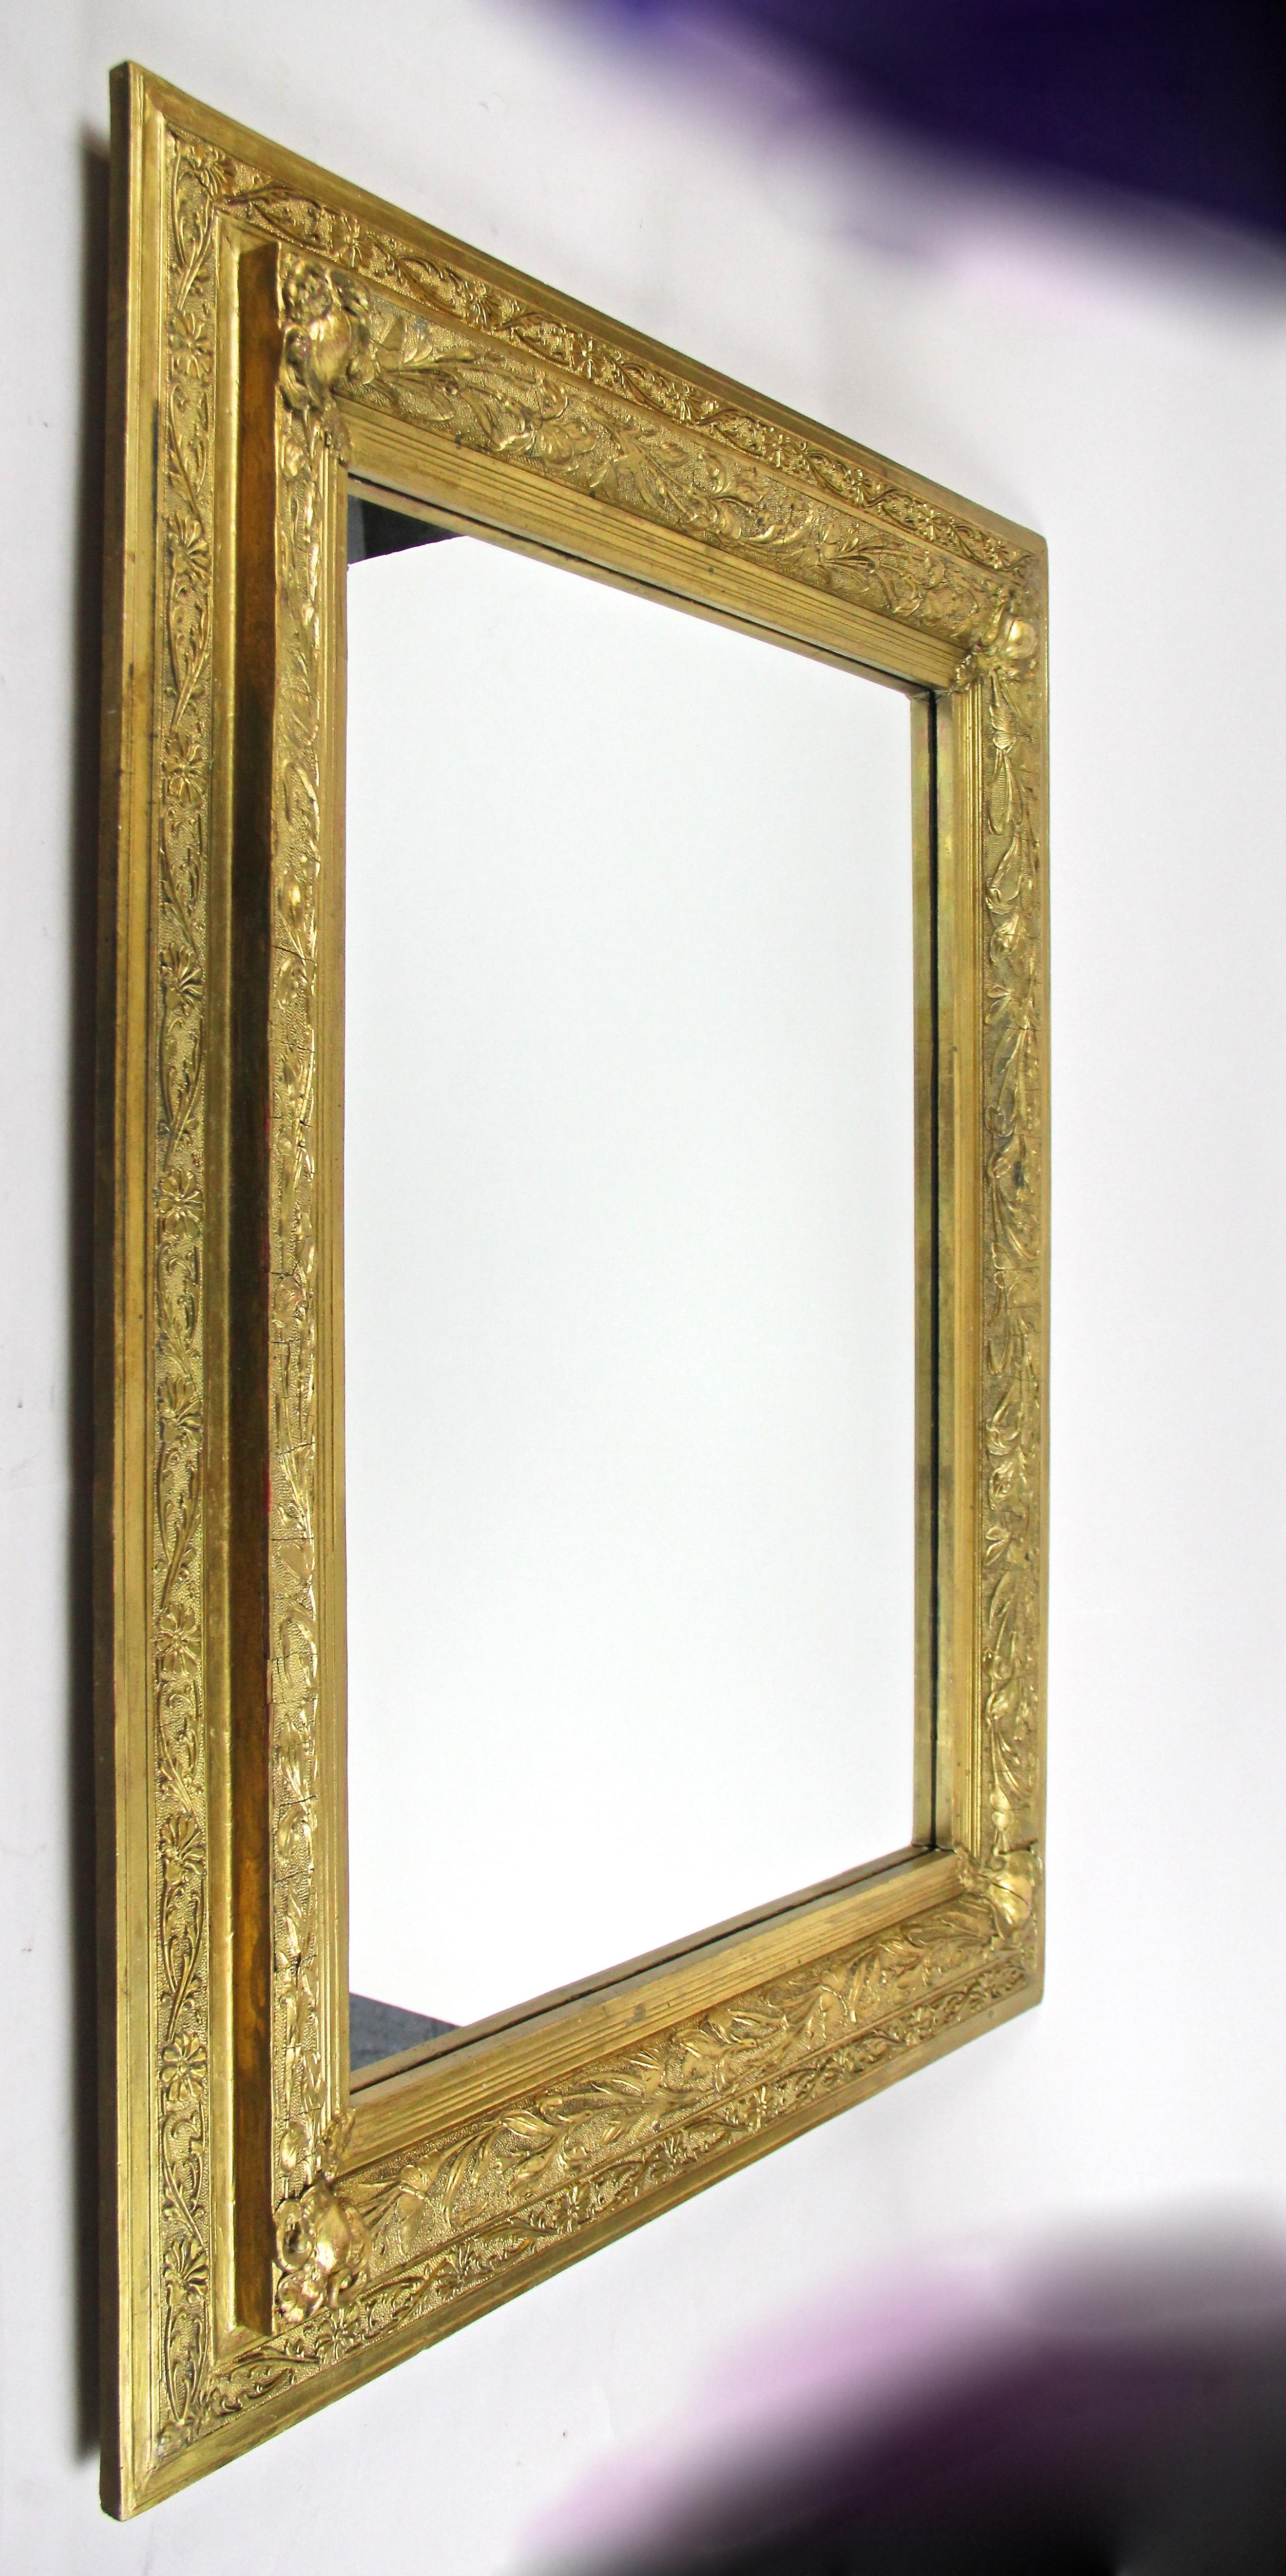 Stunning gilt Art Nouveau wall mirror out of France from the beginning of the 20th century around 1900. This large French golden mirror impresses with a broad frame work adorned by artfully processed floral design elements and lovely butterflies -